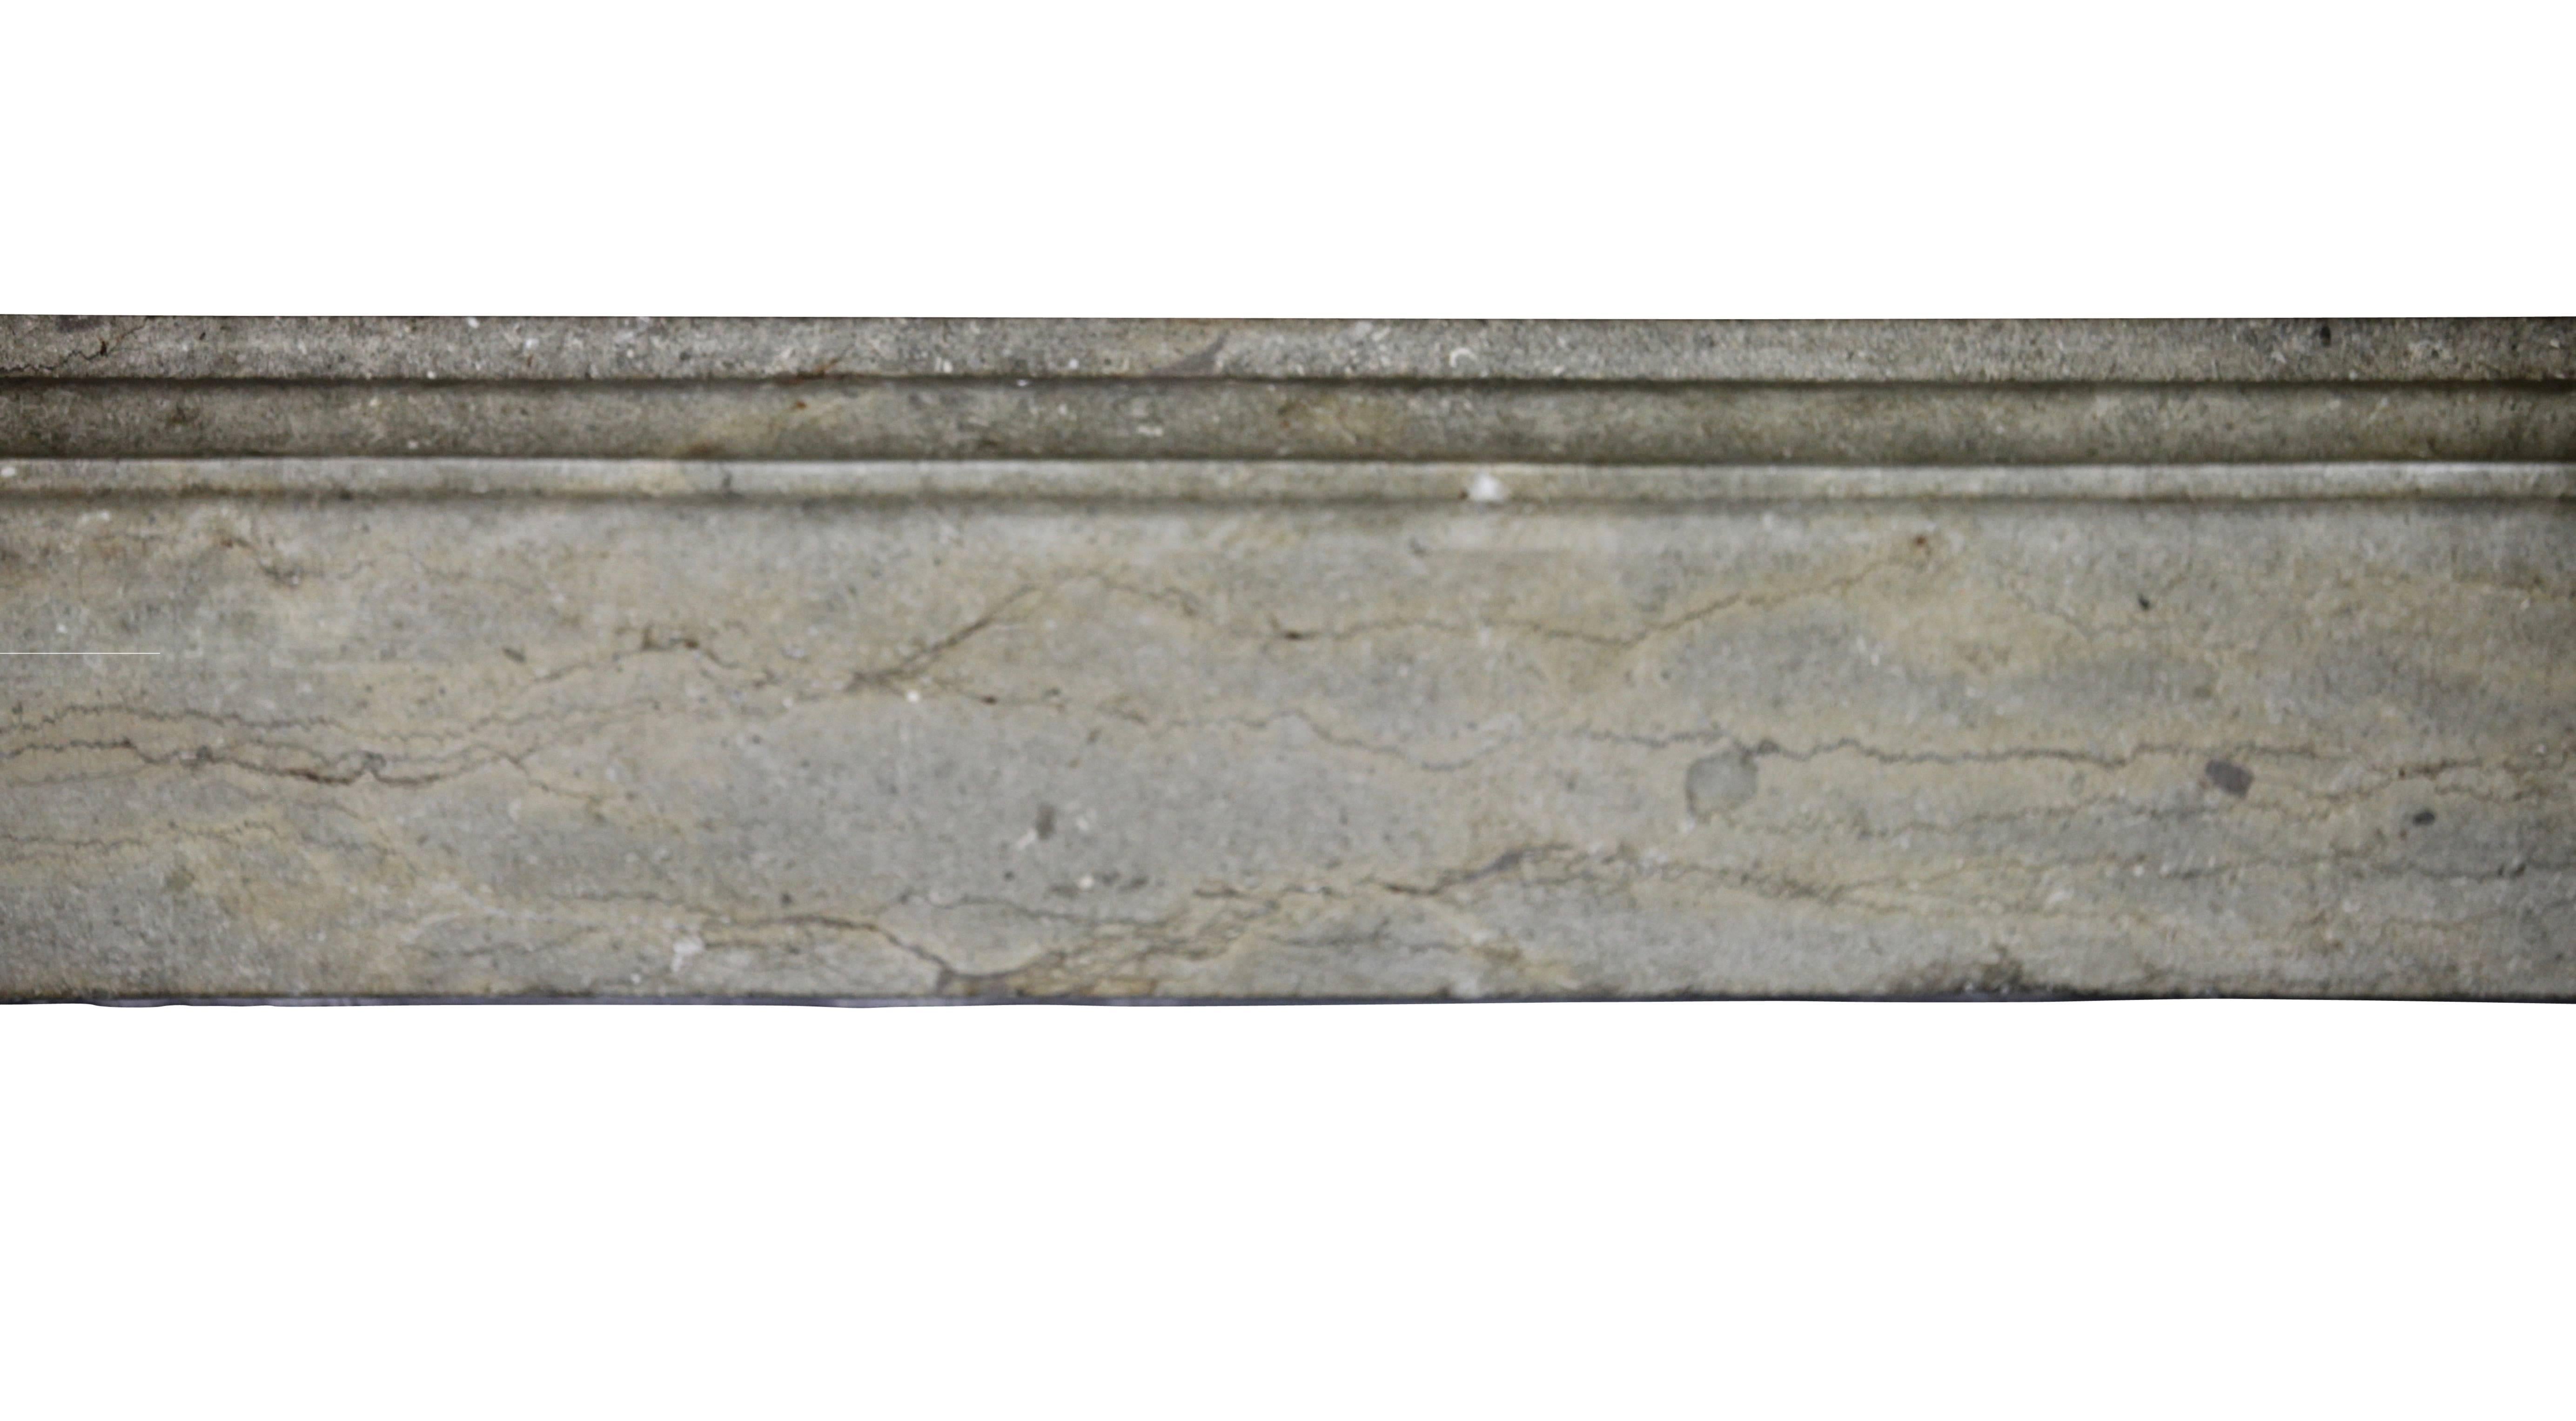 This original antique fireplace mantel with straight lines in a grey hard stone is a perfect fit for modern or contemporary interior design.
Some fossils are showing in the stone.
Measures:
134 cm EW 52,75